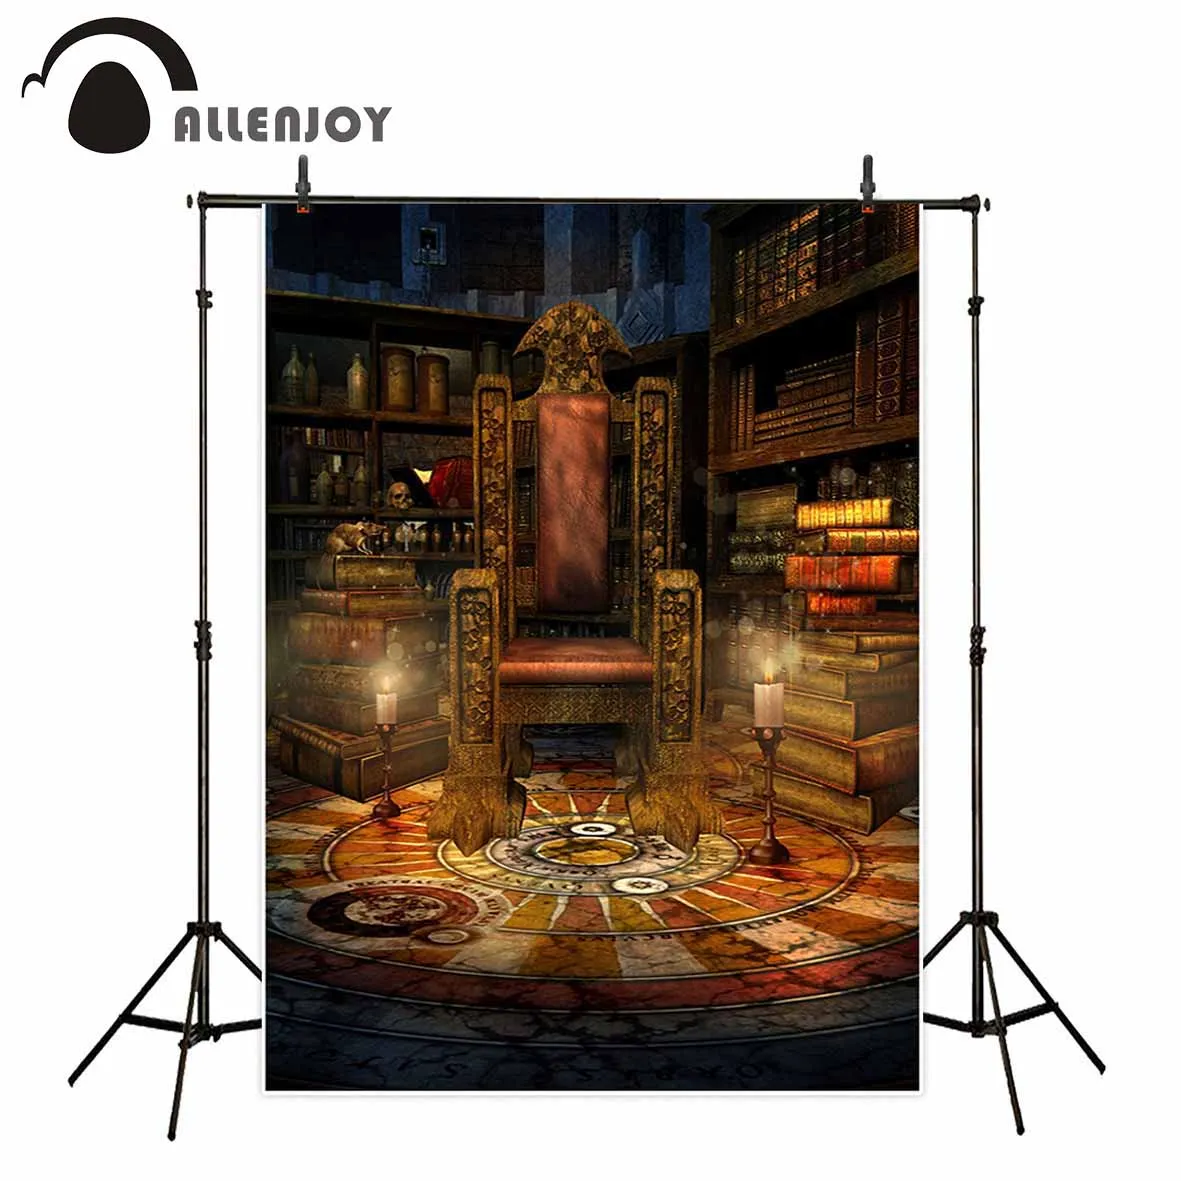 

Allenjoy photography backdrop Vintage luxurious throne books candle Halloween background for photo studio camera fotografica